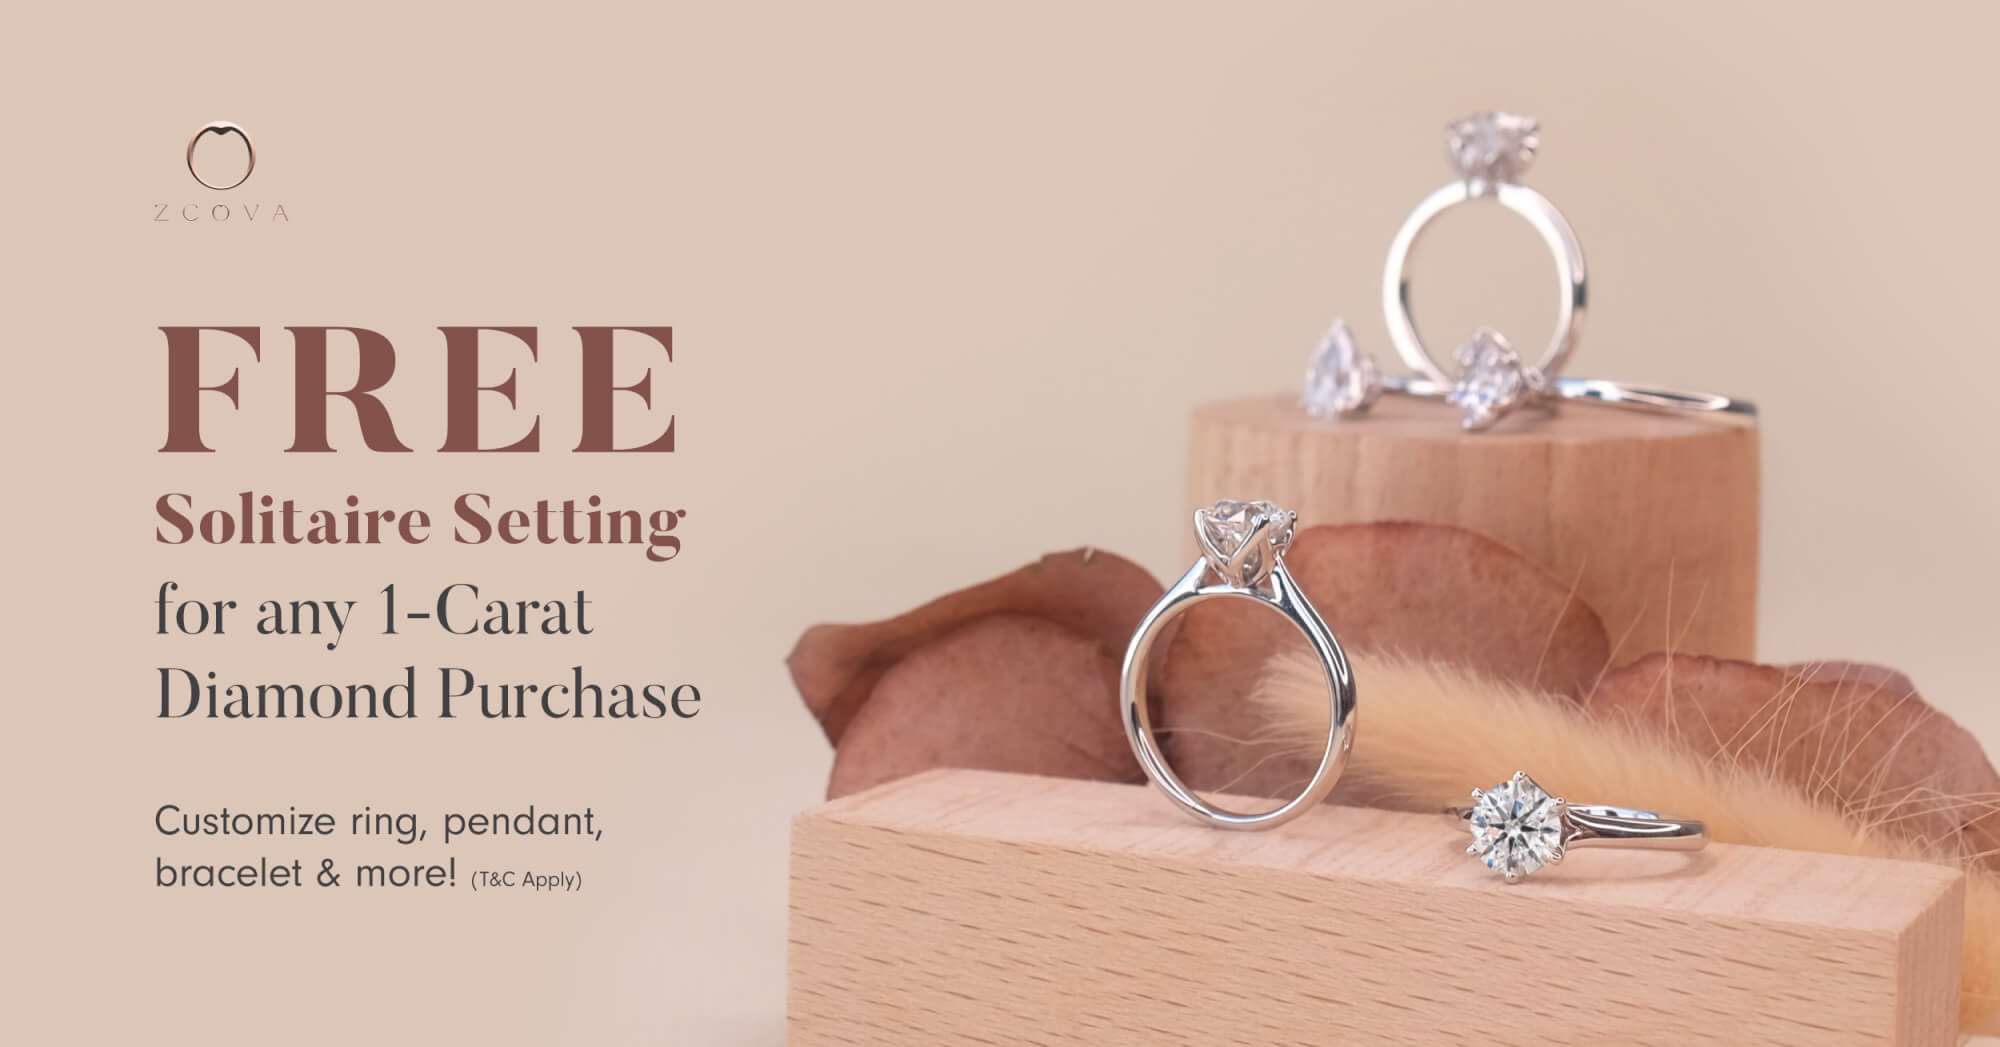 free solitaire setting for 1ct diamond ring promotion